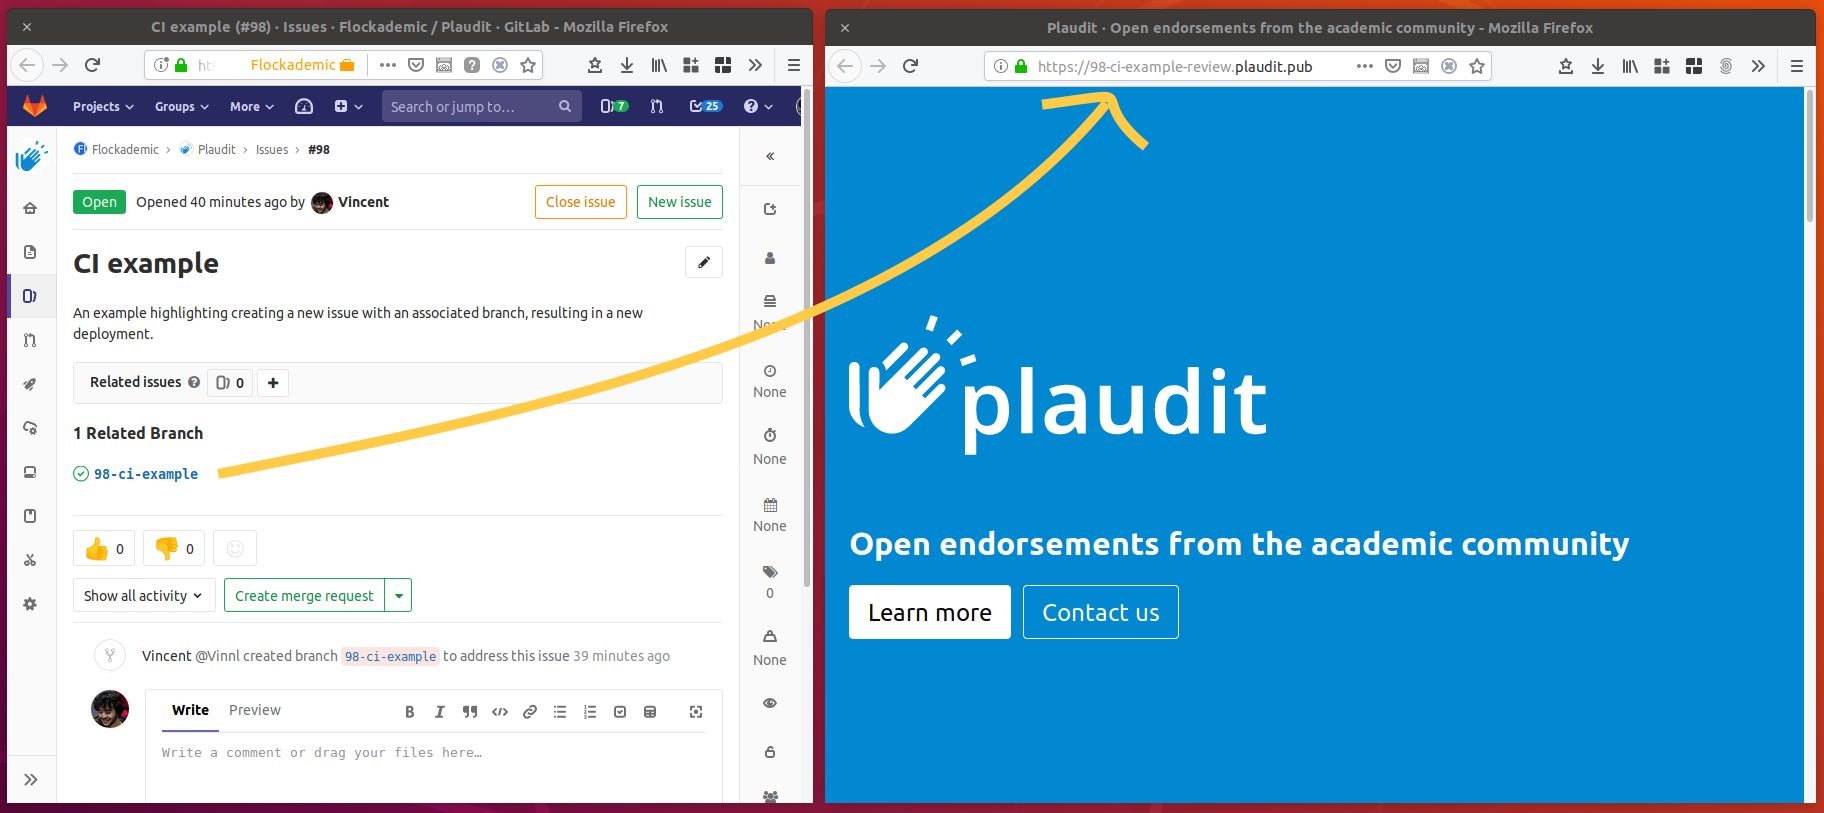 Screenshot of the Plaudit website deployed to https://98-ci-example-review.plaudit.pub, next to the Issue it was created for.